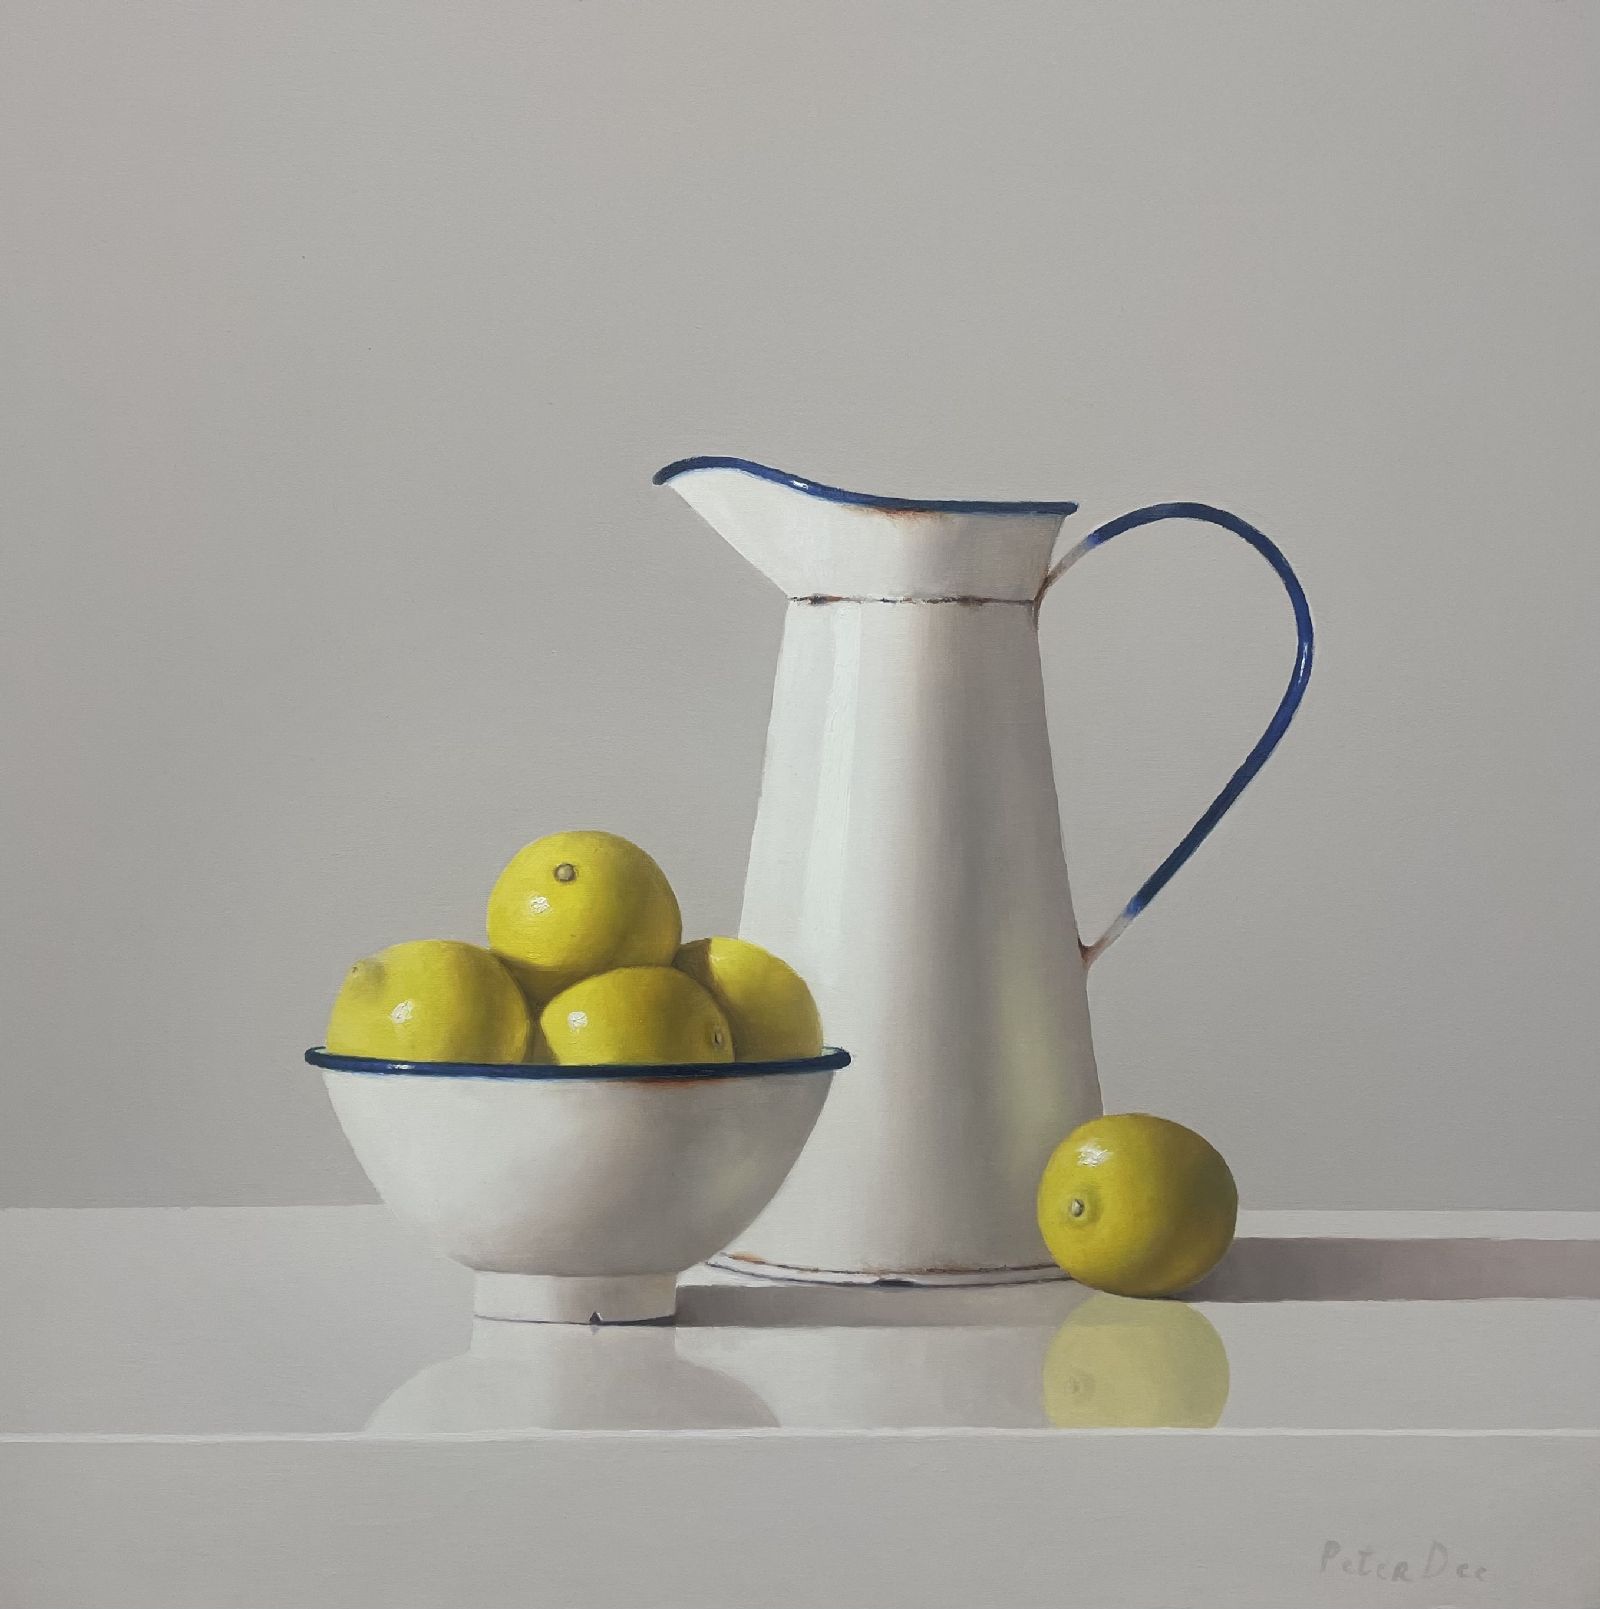 White Vintage Enamelware Pitcher and Bowl with Lemons by Peter Dee